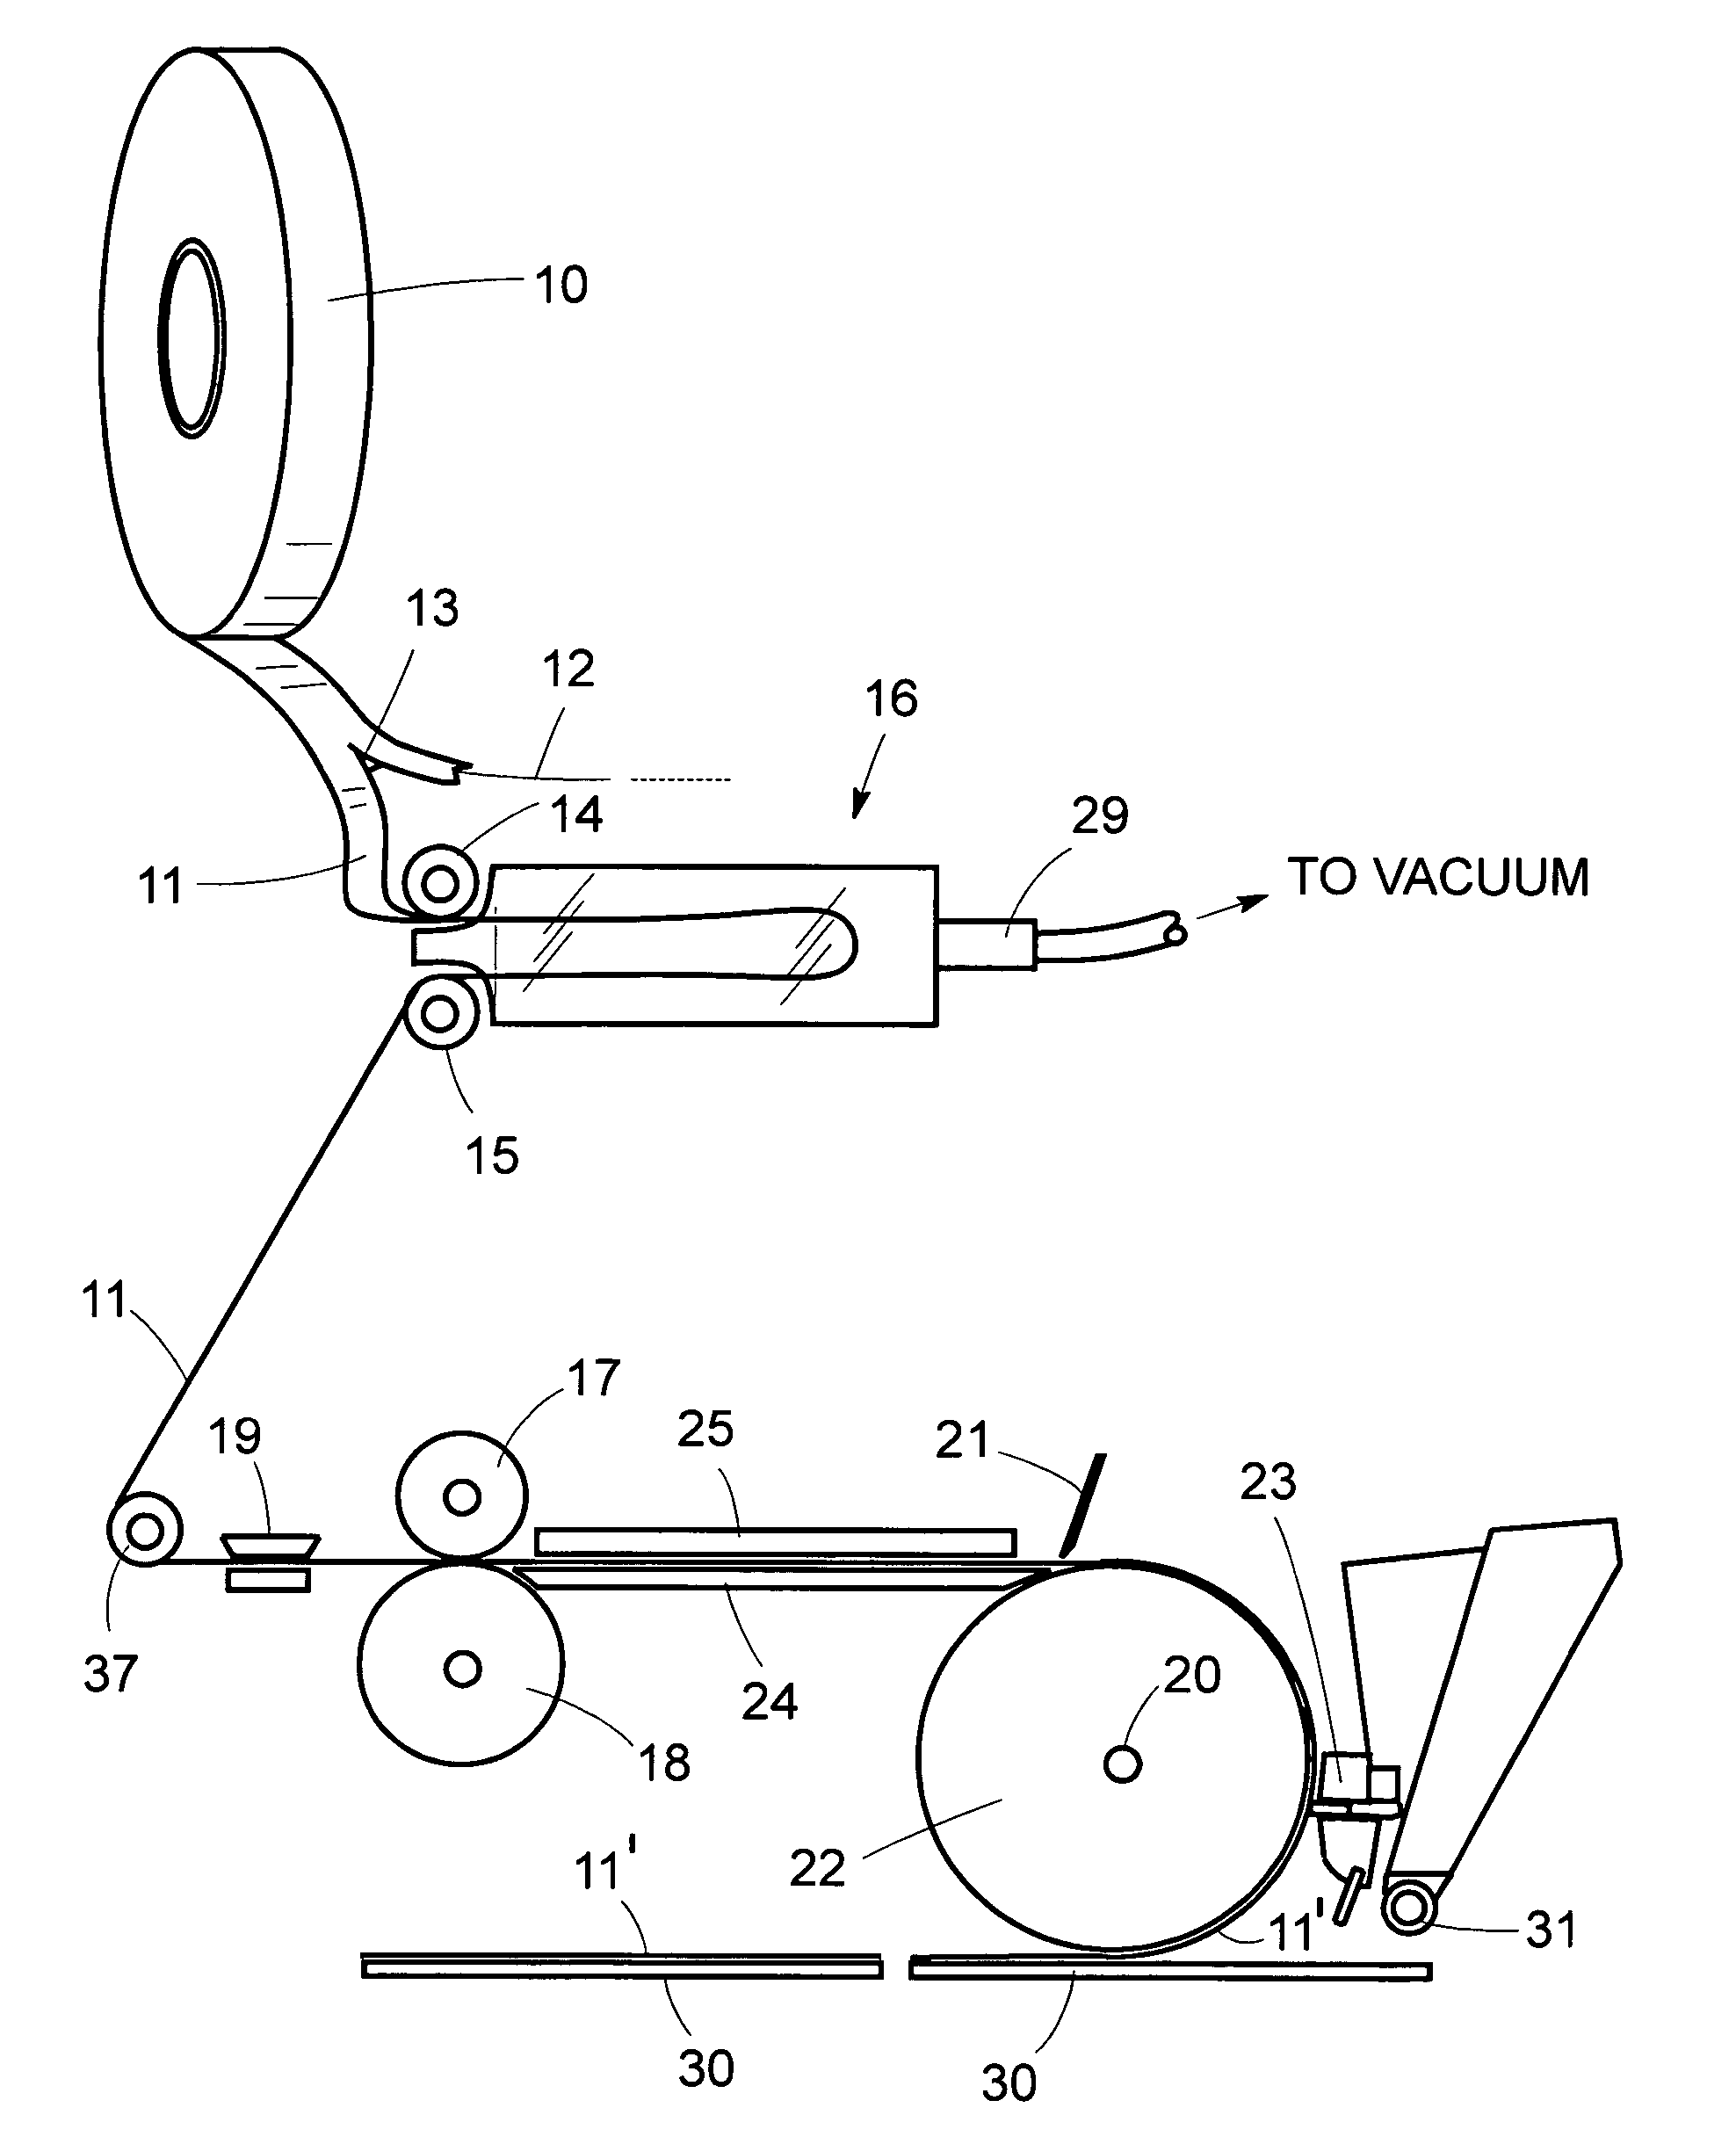 Apparatus and process for placement of sealing adhesives on containers